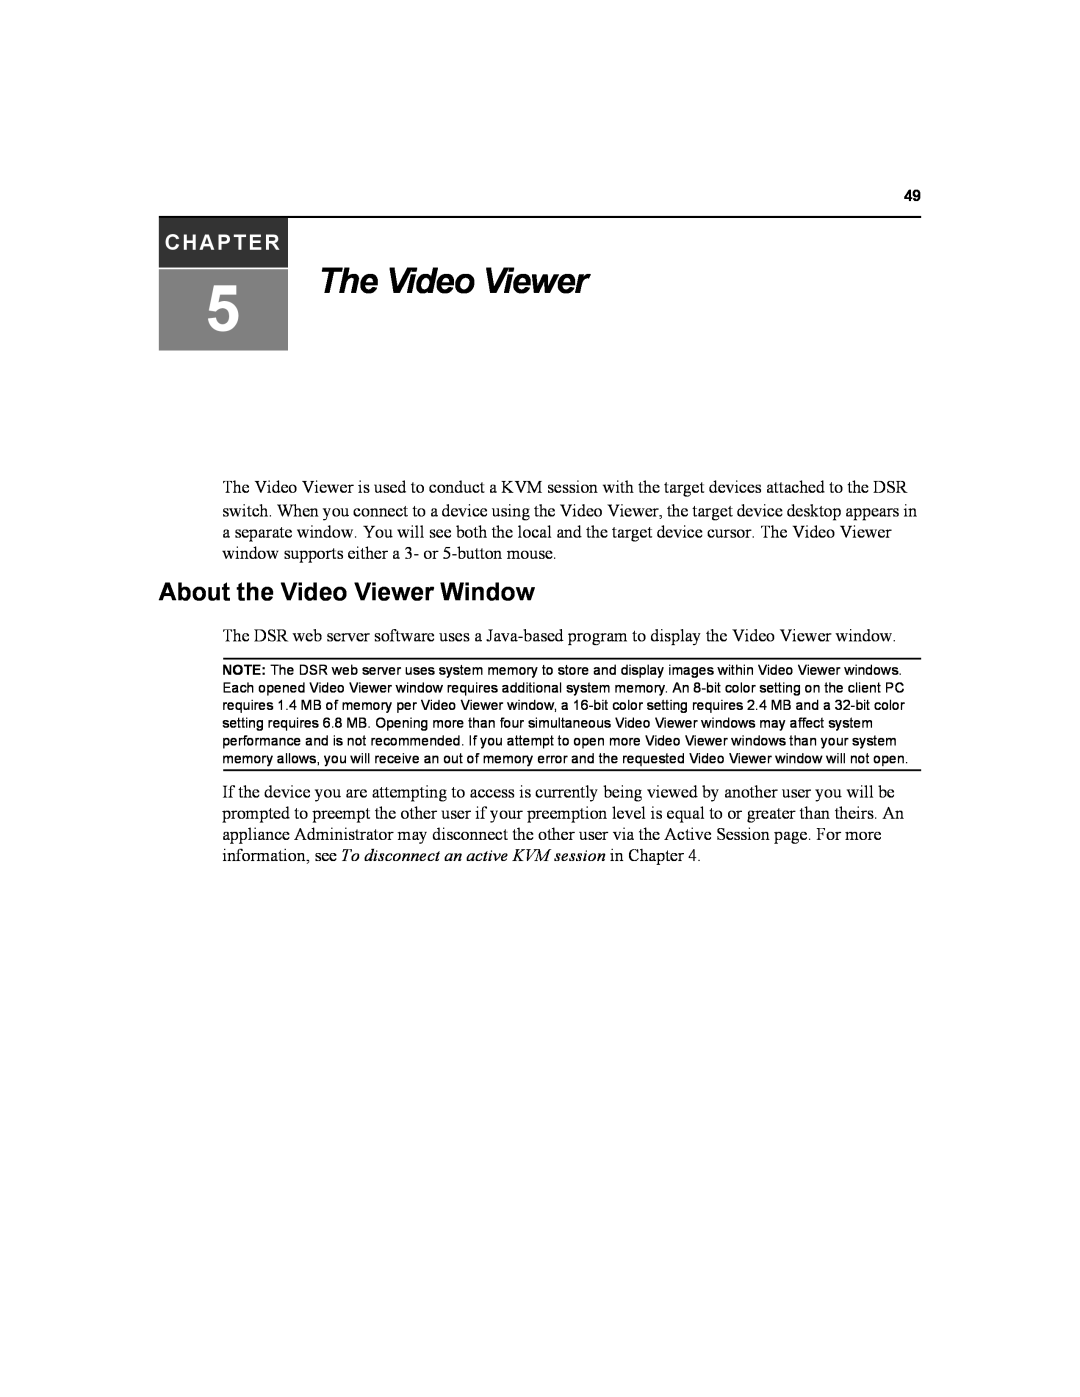 Daxten DSR4020, DSR2020, DSR8020, DSR1020 manual The Video Viewer, About the Video Viewer Window, Chapter 